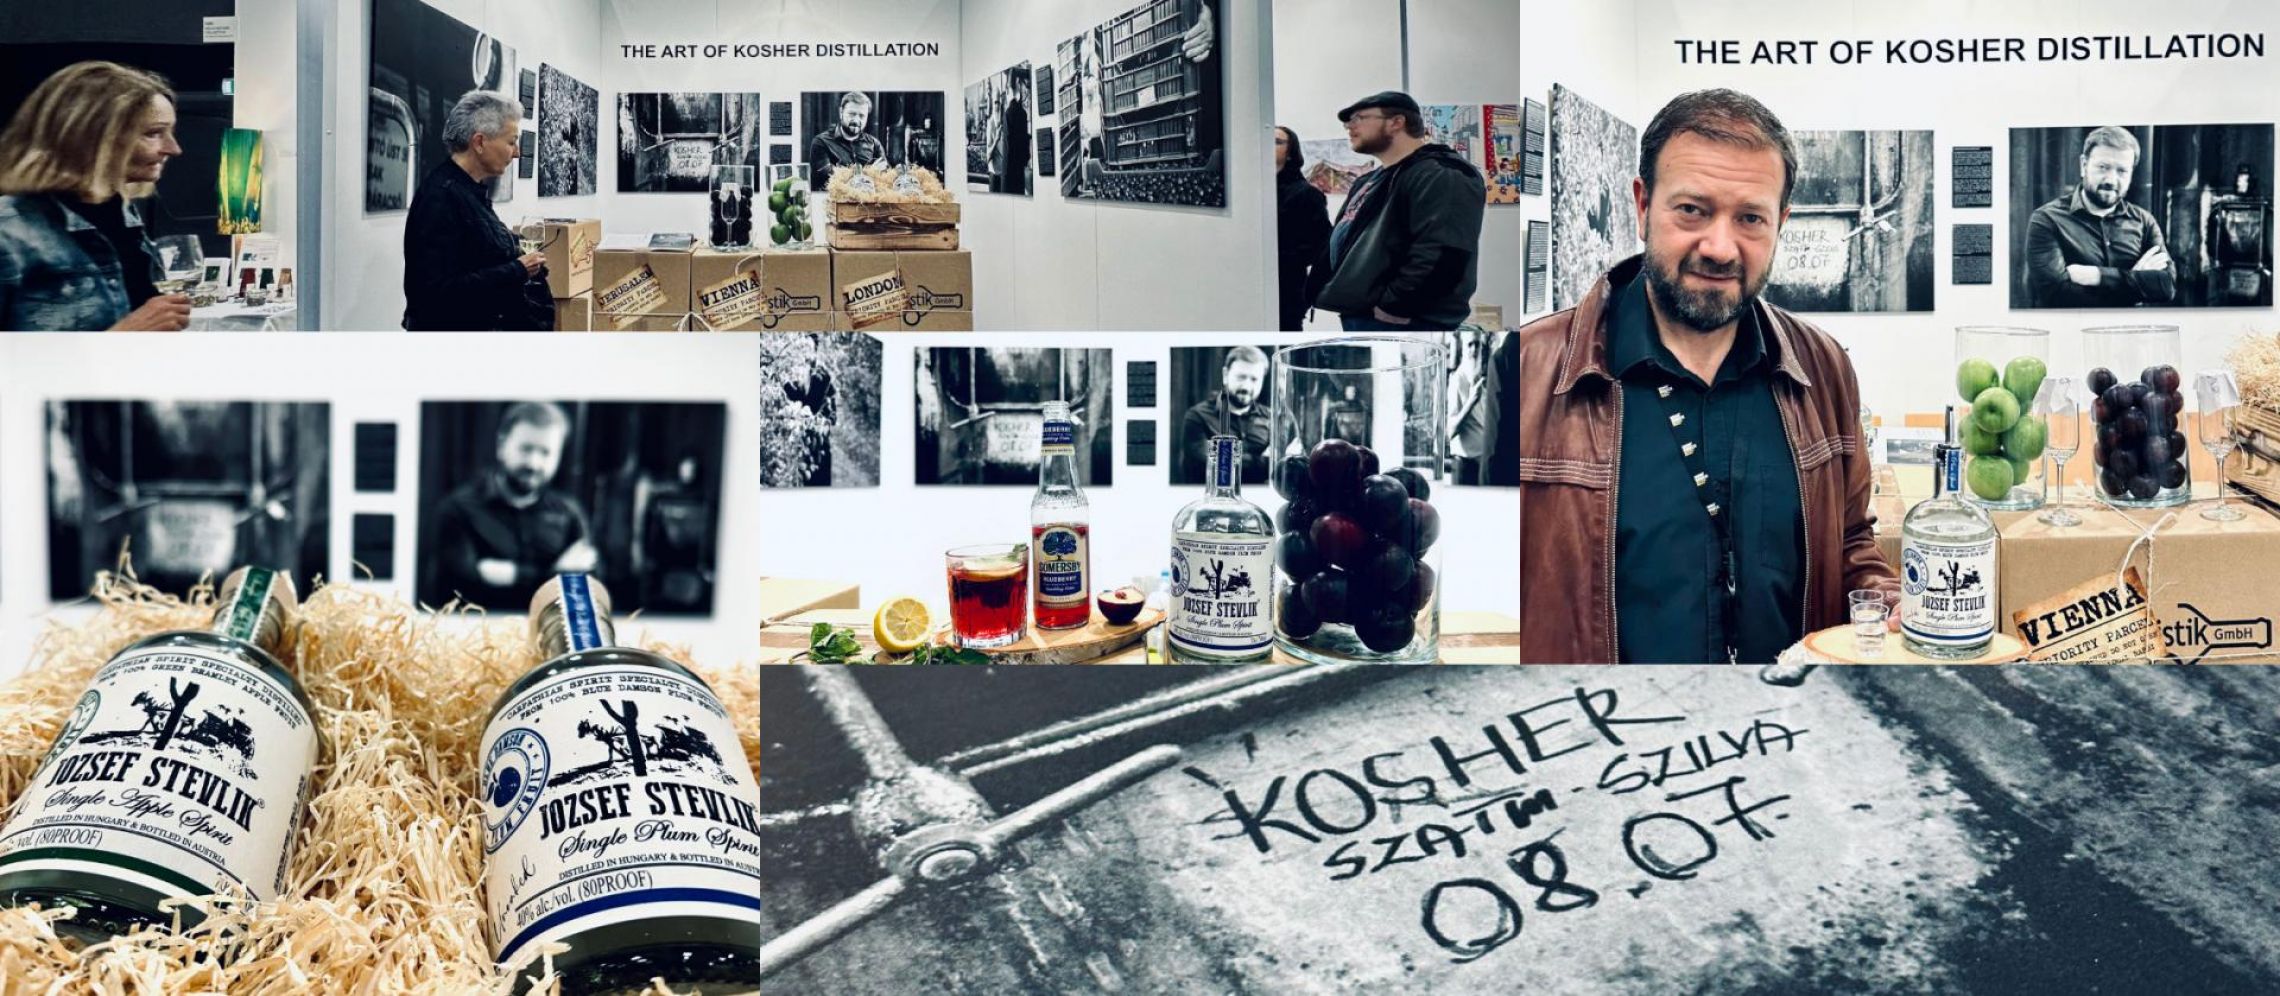 Photo for: Jozsef Stevlik's Sustainable Spirits Shine at the London Spirits Competitions